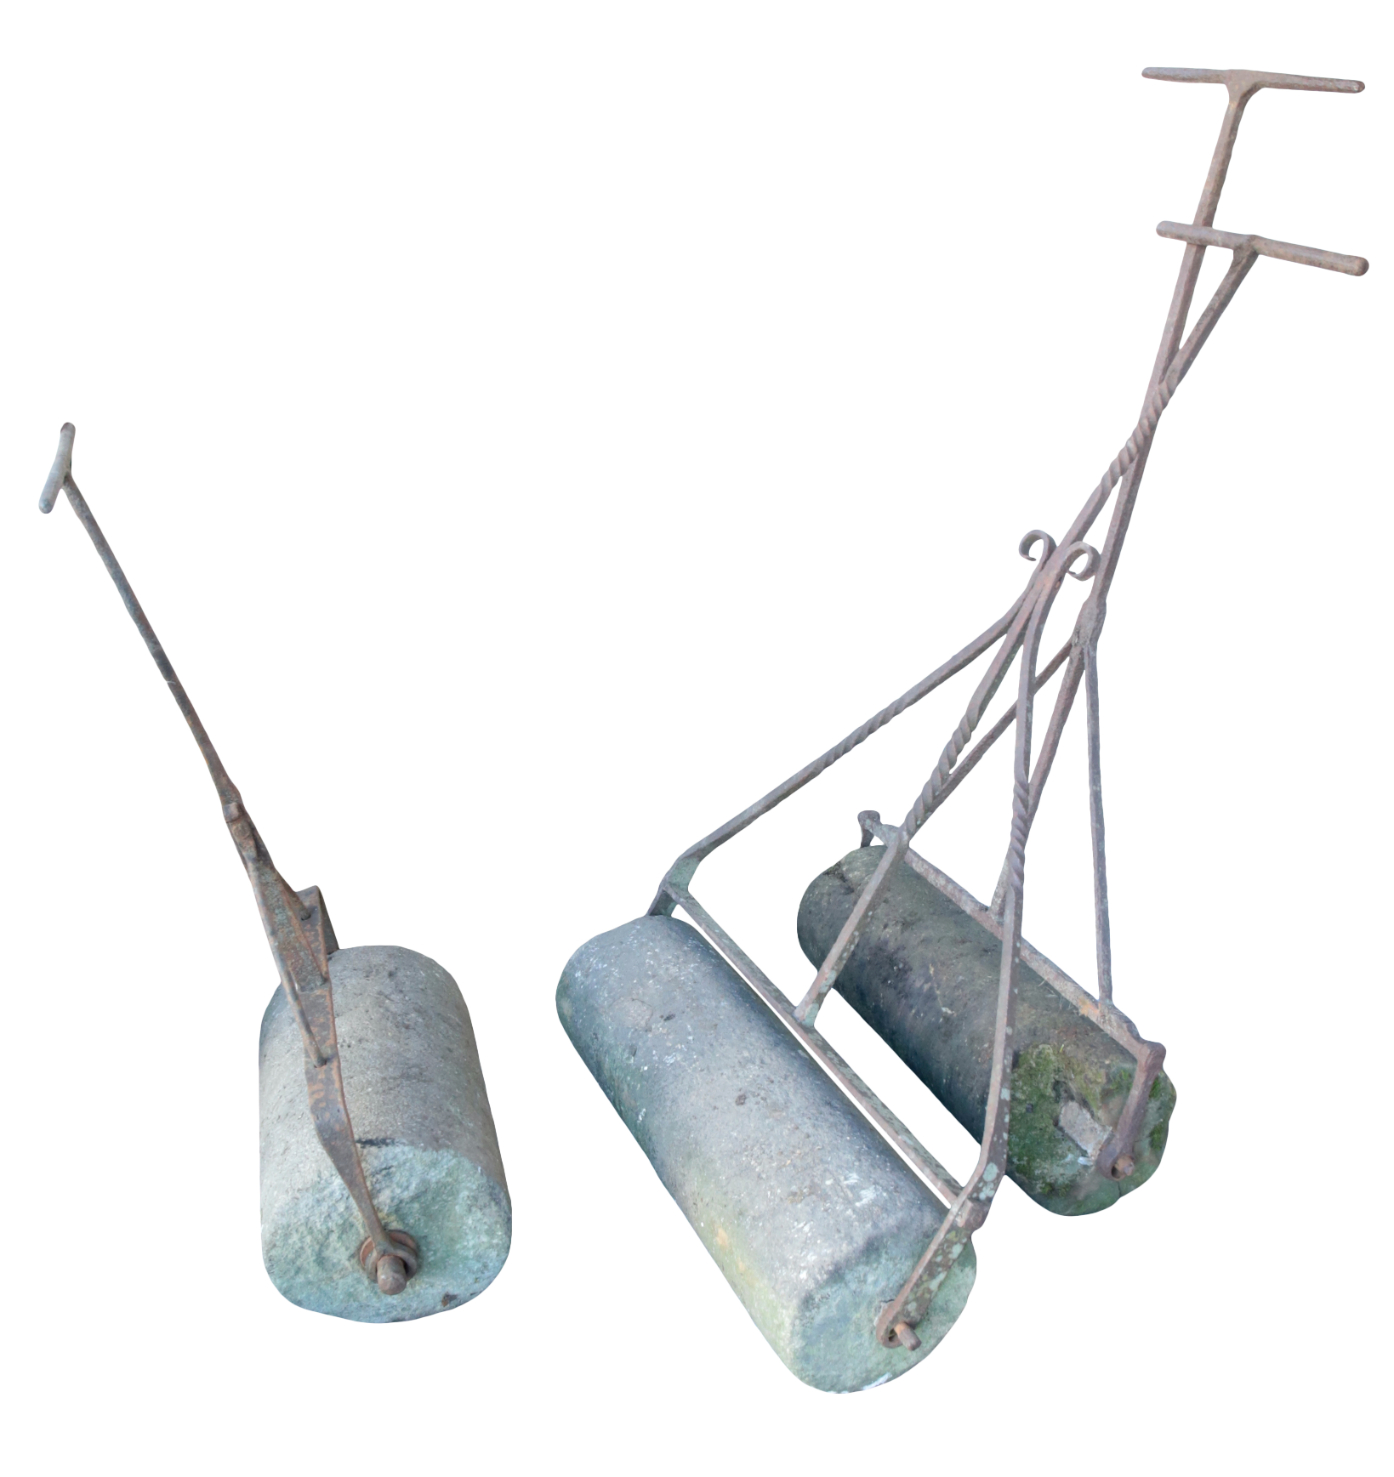 A GROUP OF THREE STONE GARDEN ROLLERS 3108ba